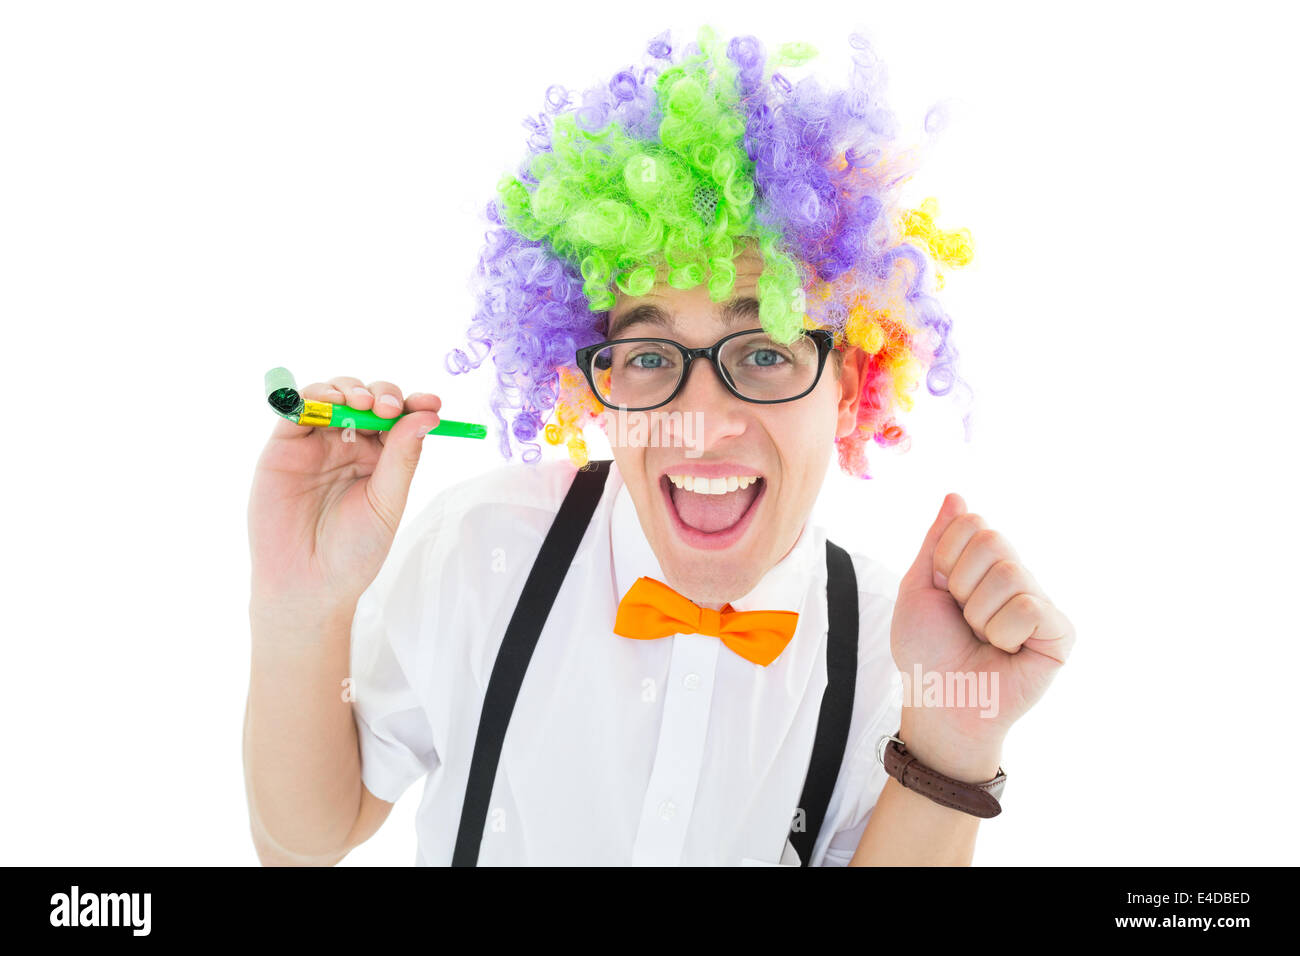 Geeky hipster wearing a rainbow wig holding party horn Stock Photo